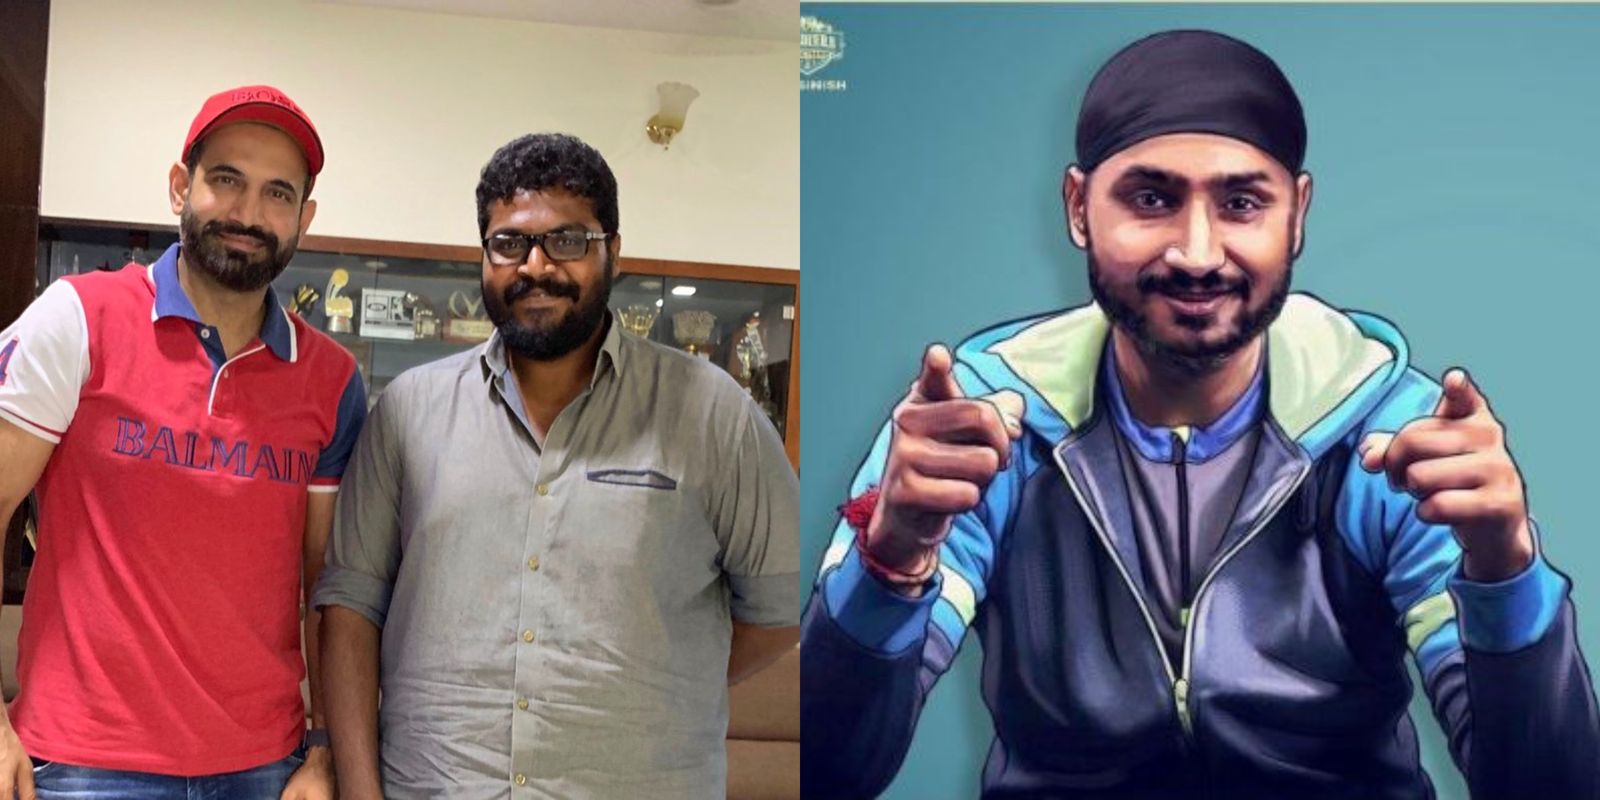 Cricketers Harbhajan Singh And Irfan Pathan All Set To Act In Tamil Films Dikkiloona And Vikram 58 Respectively 